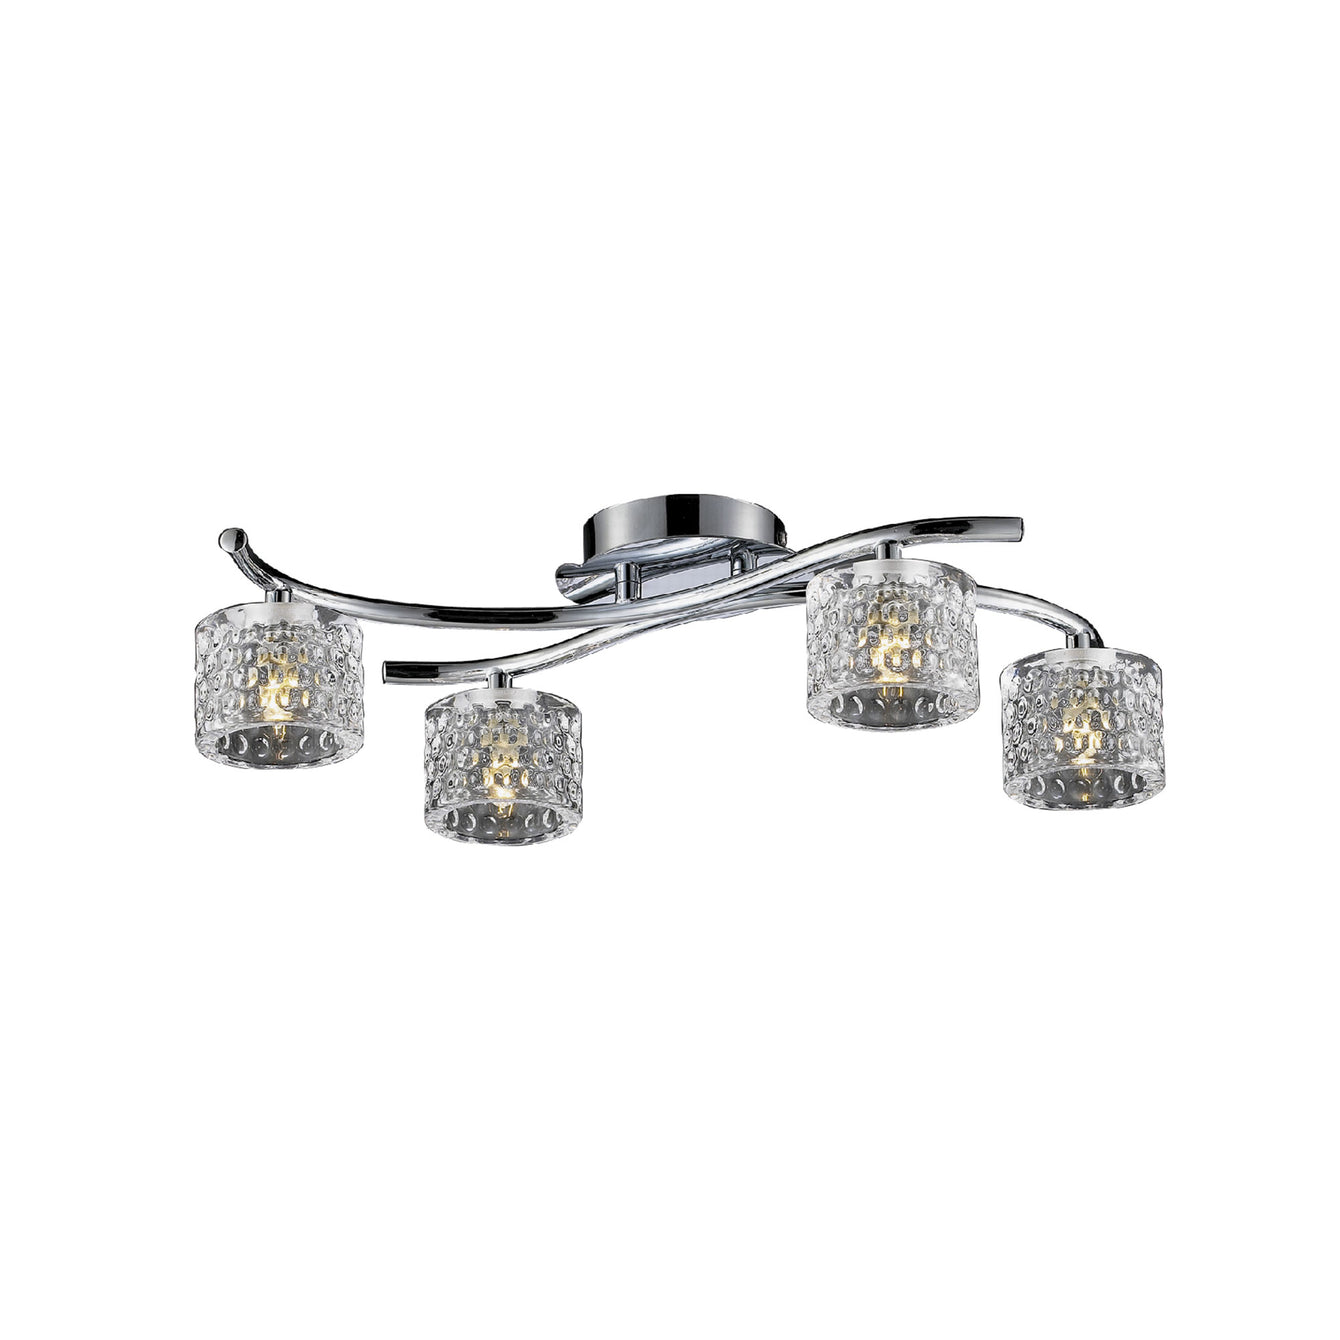 Finsbury 4, 5 and 8 Arm Pendant LED Light - Buy It Better 4 Arm